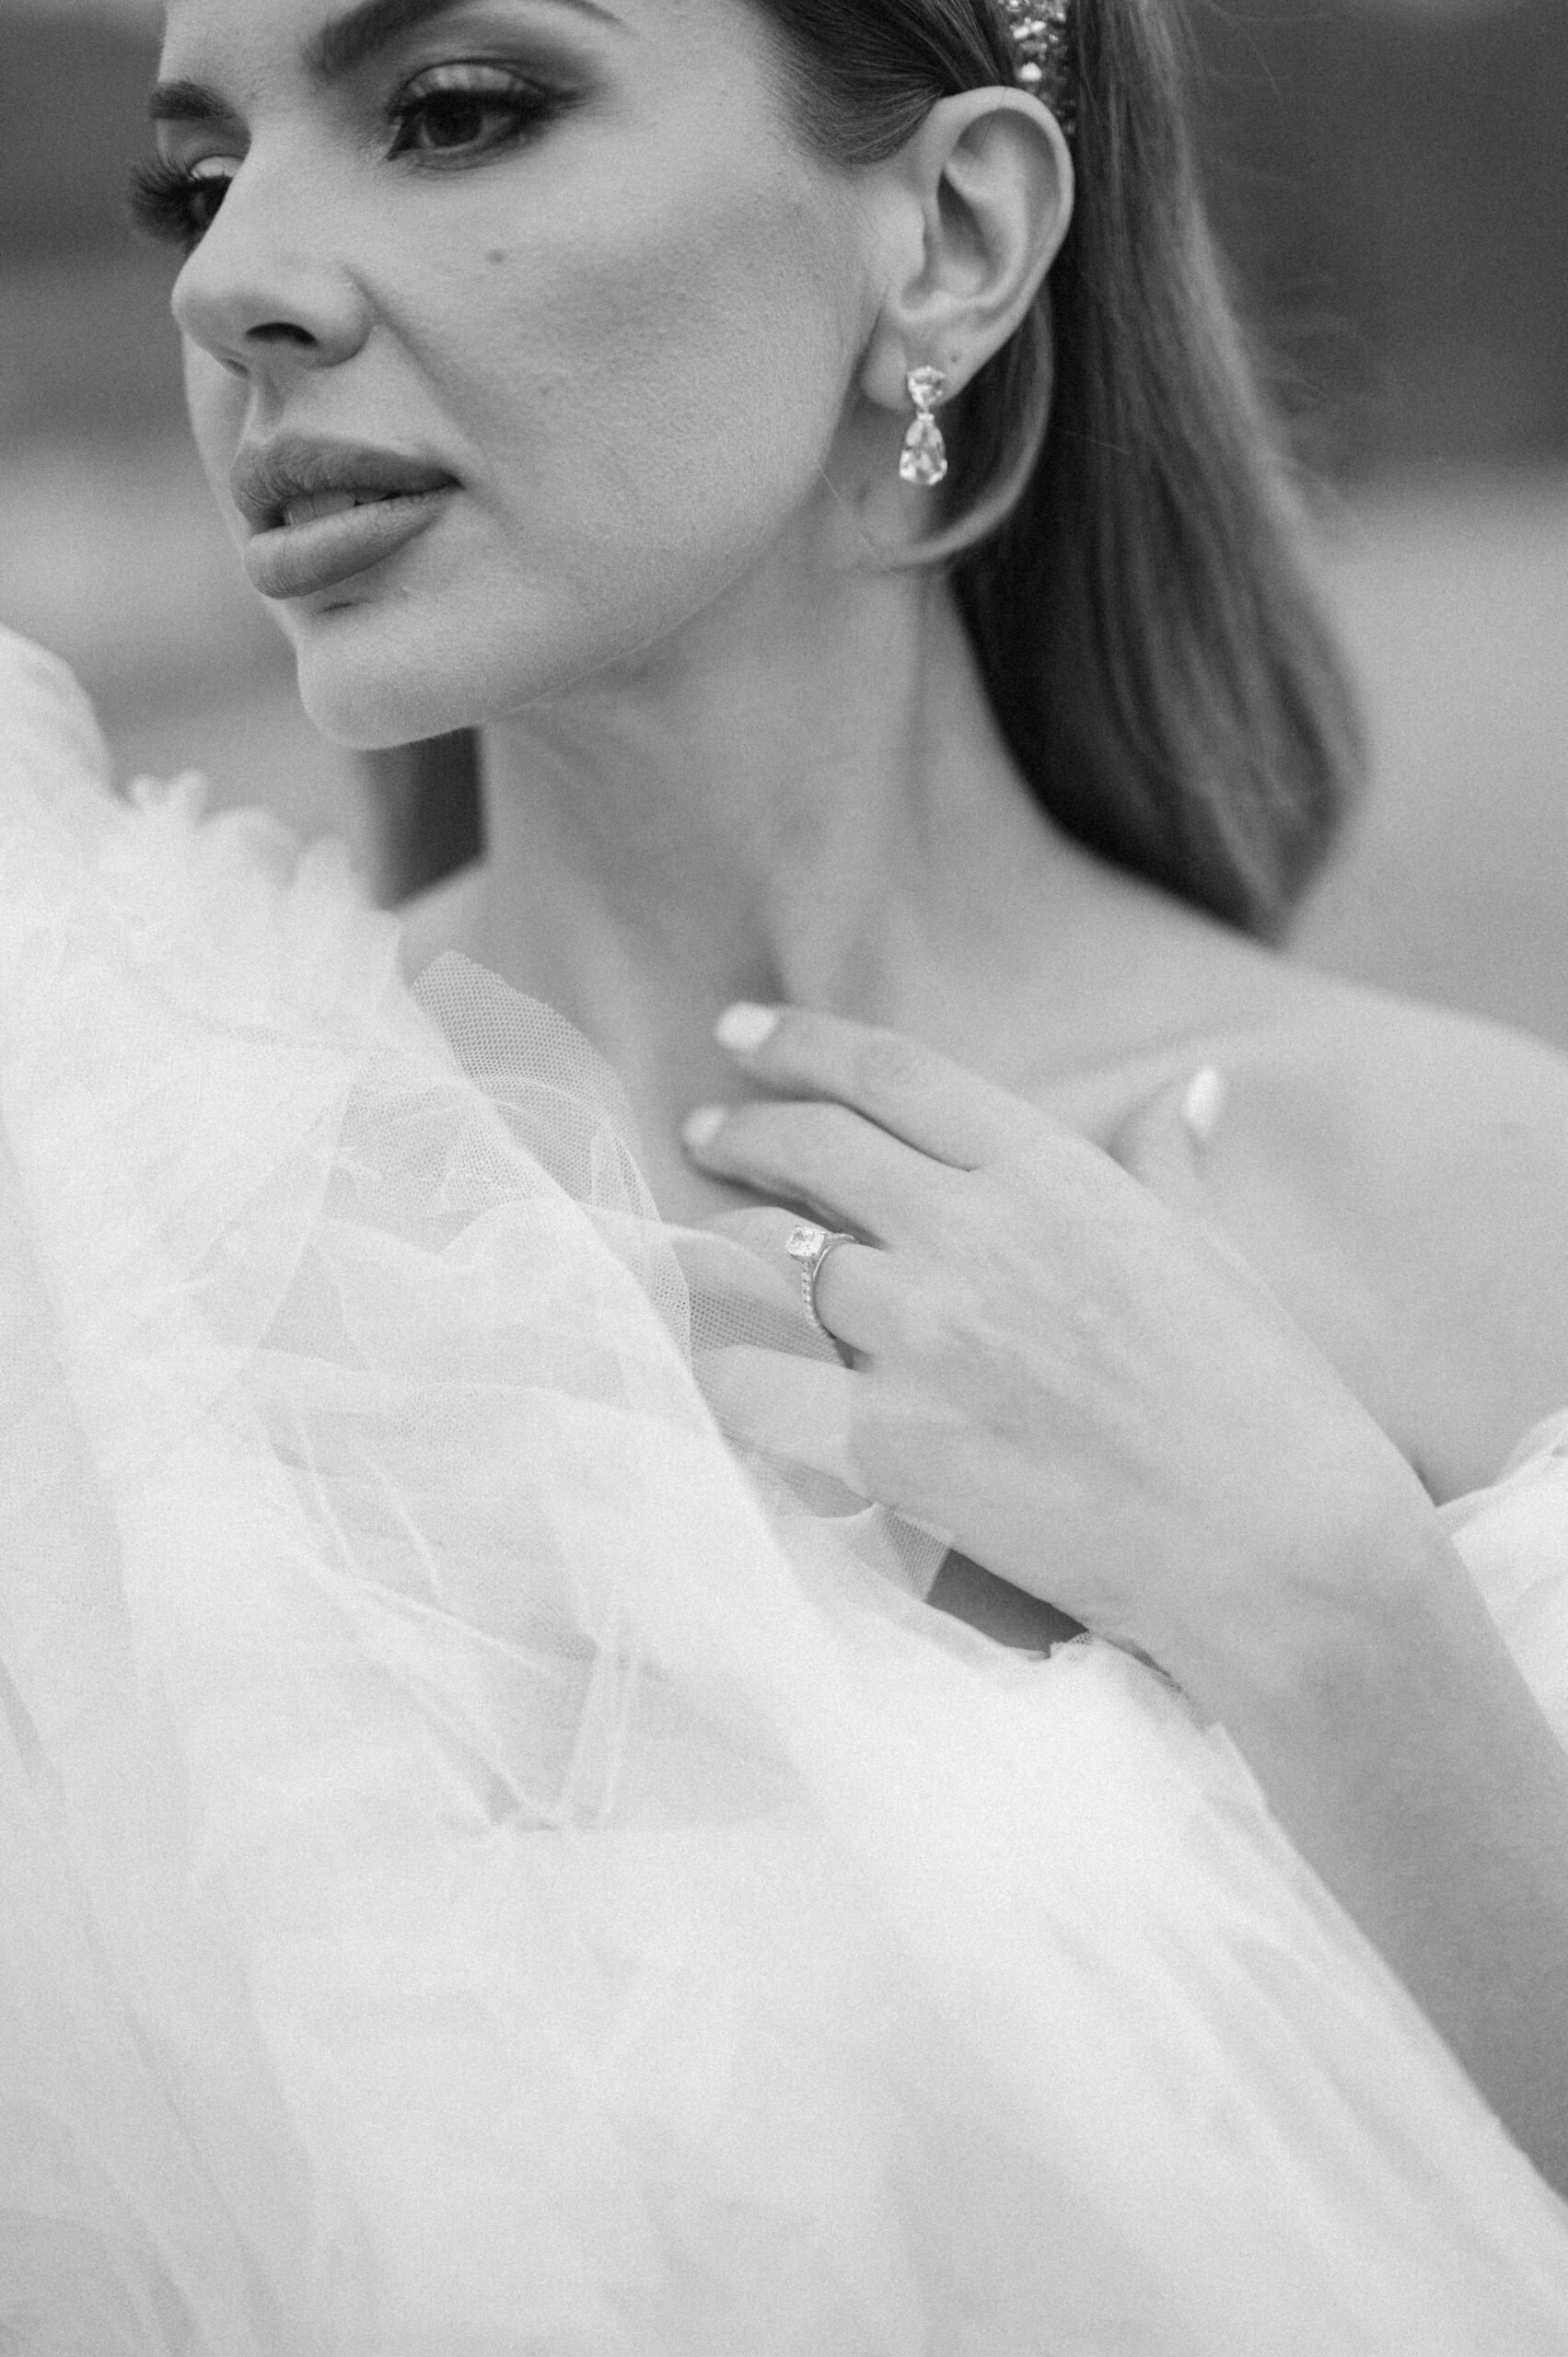 The elegant bride wore diamond earrings and a bridal headband at this colorful luxury wedding at Foxhall Resort. | Megan Kuhn Photography